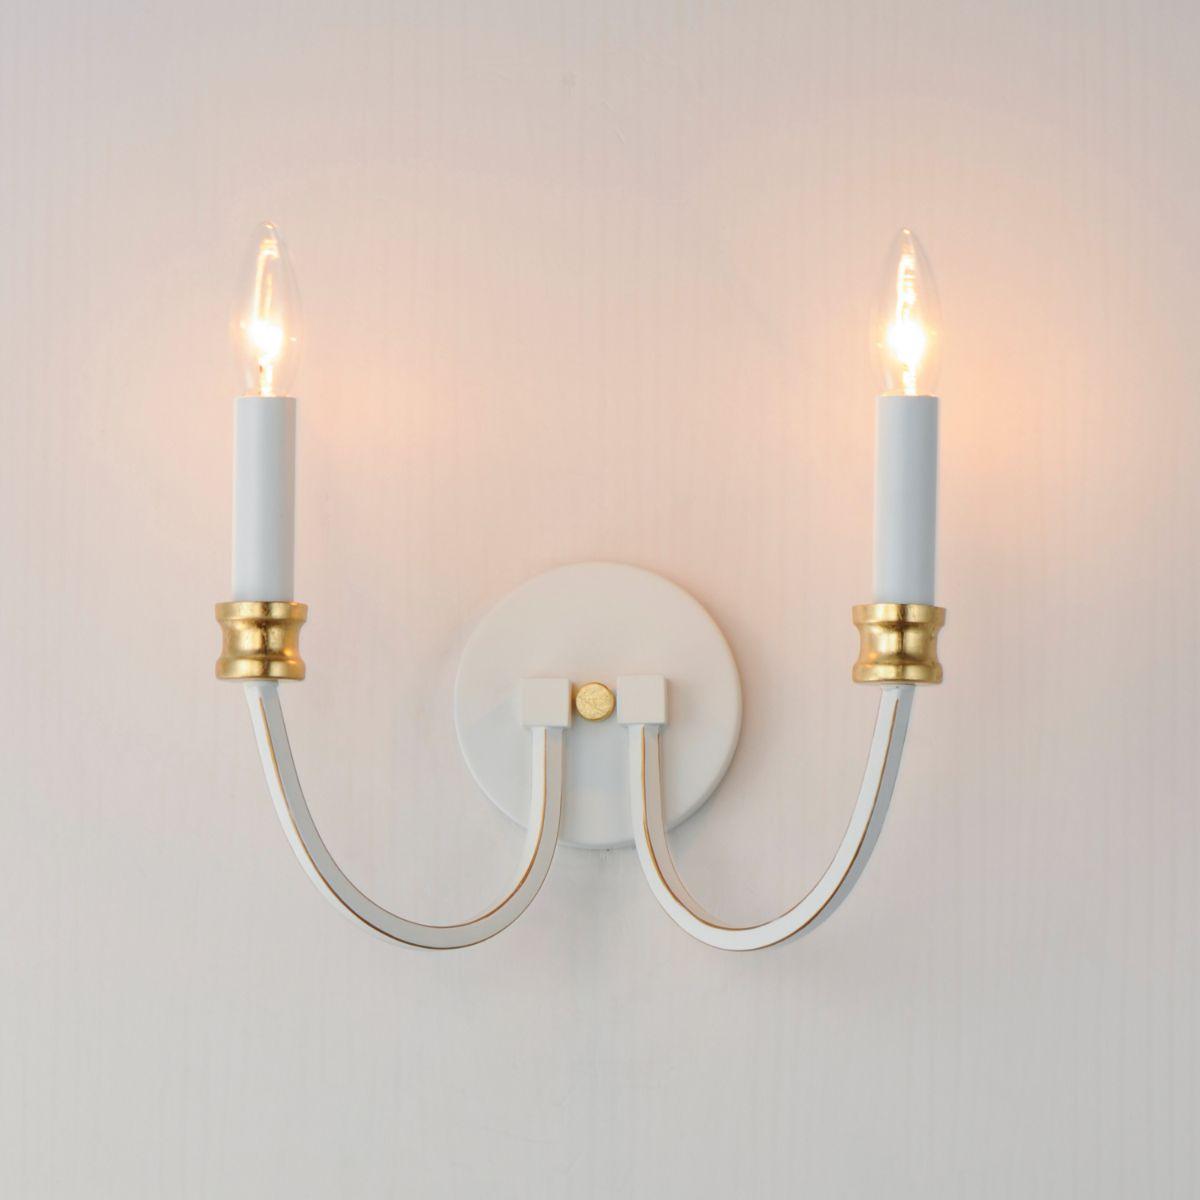 Charlton 12 in. 2 Lights Armed Sconce White & Gold Finish